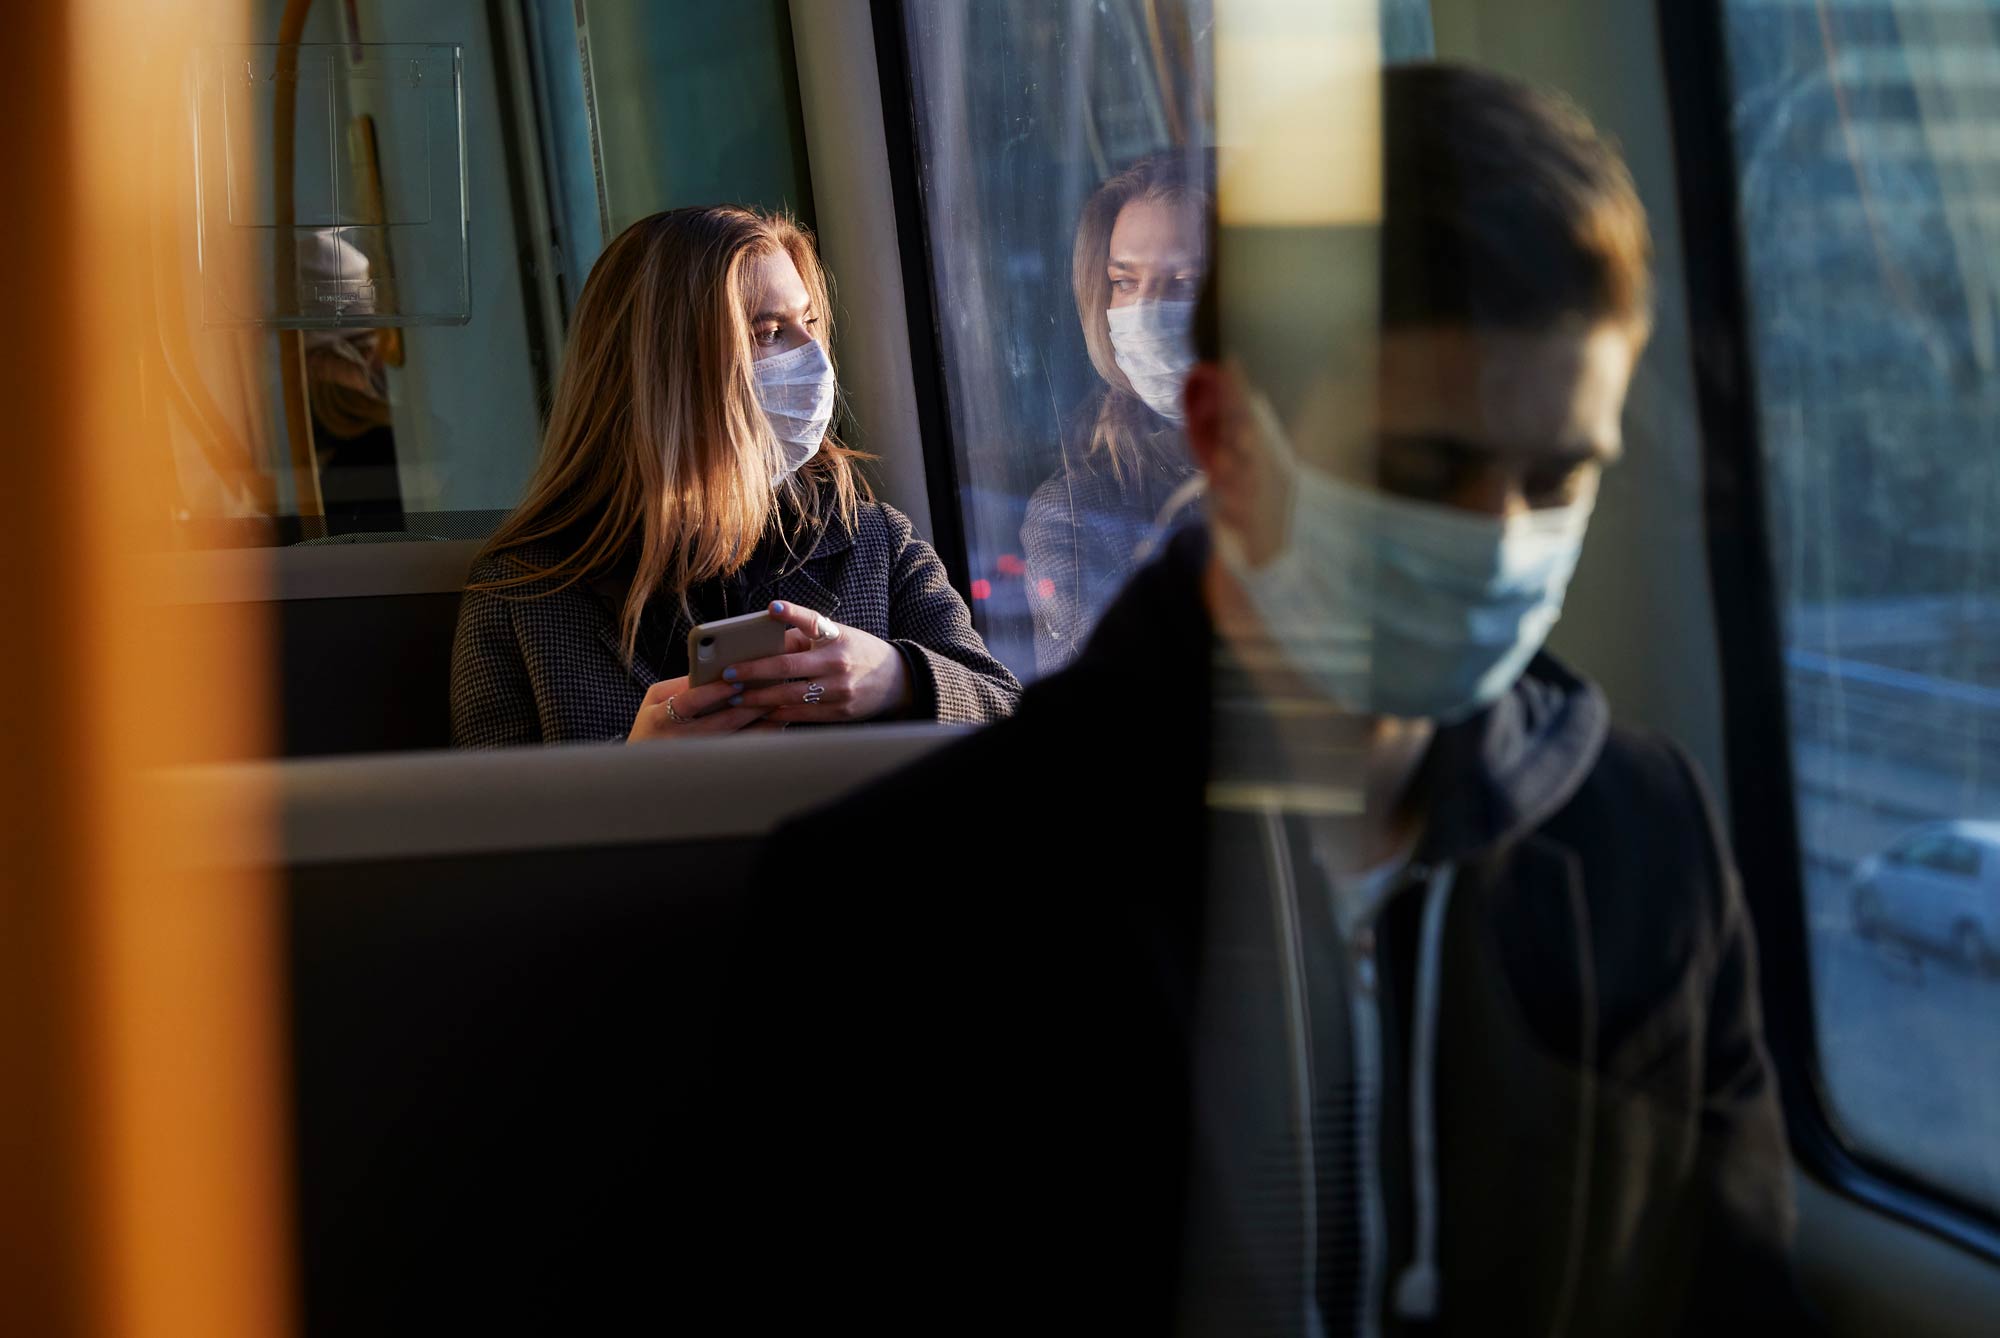 Woman sitting on bus wearing protective mask